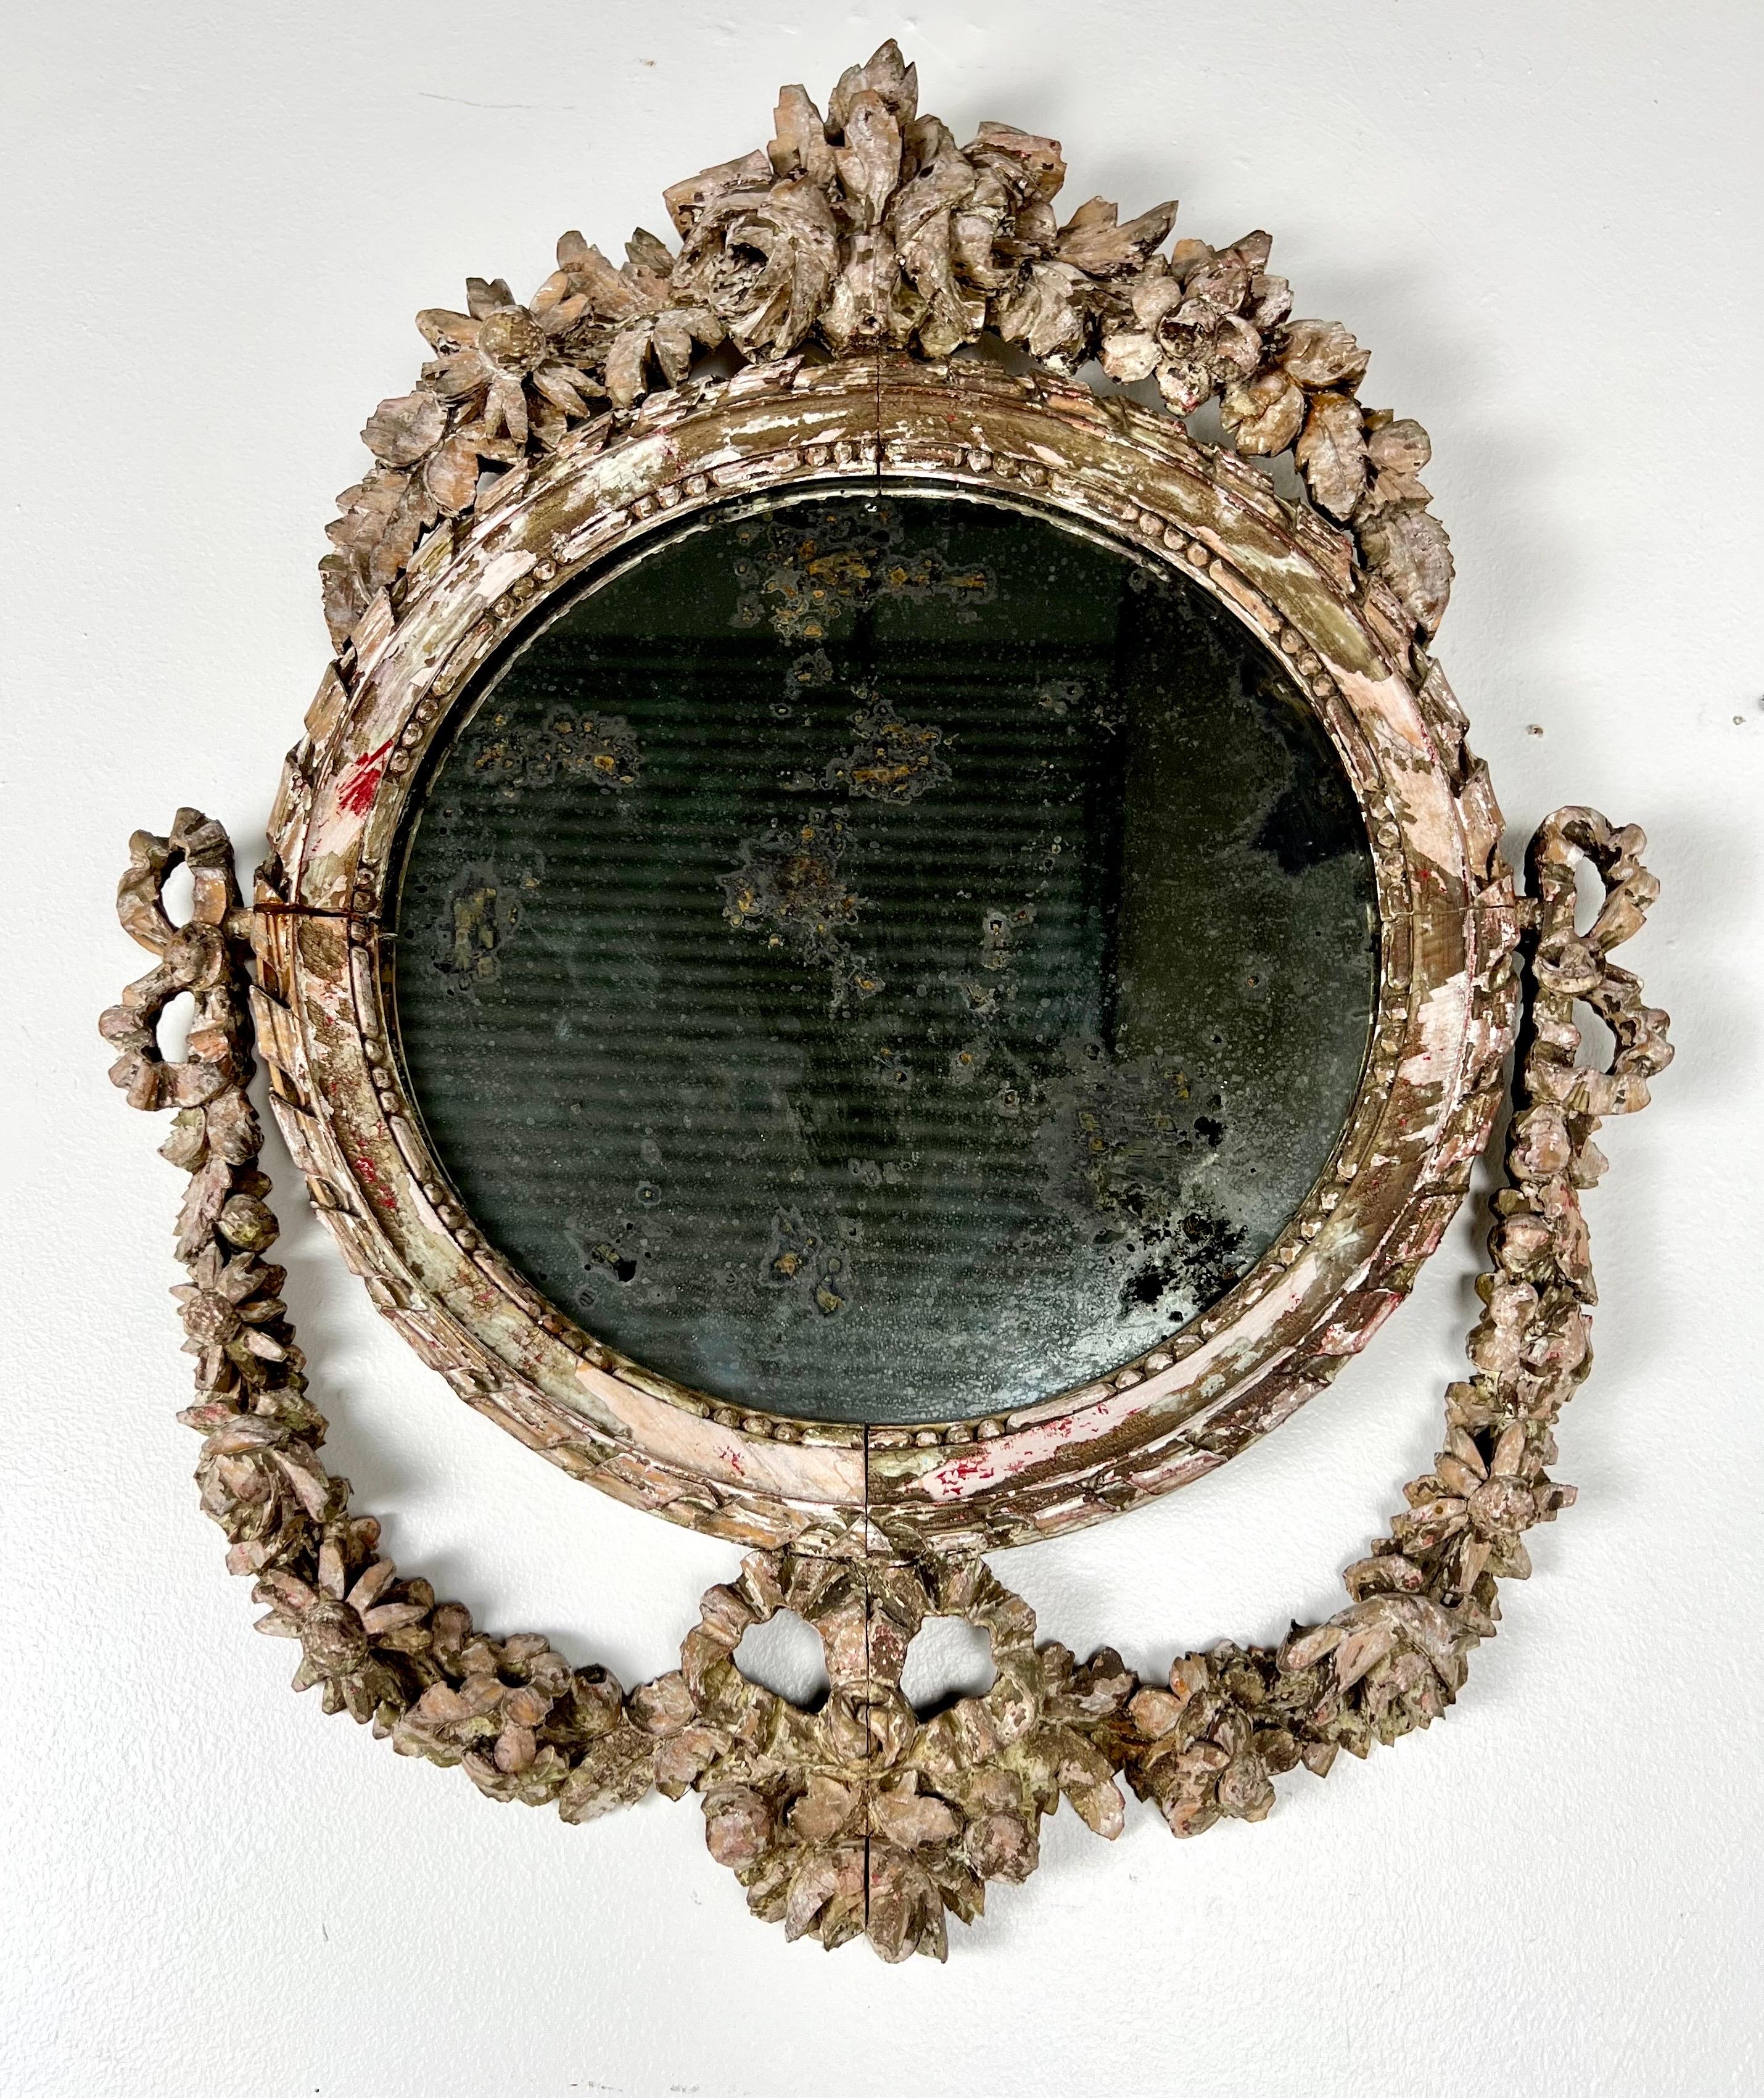 19th century Rococo carved mirror adorned with intricate floral motifs.  This mirror would be a great addition to any classical or vintage-inspired decor.  The craftsmanship and attention to detail during the Rococo period often resulted in timeless